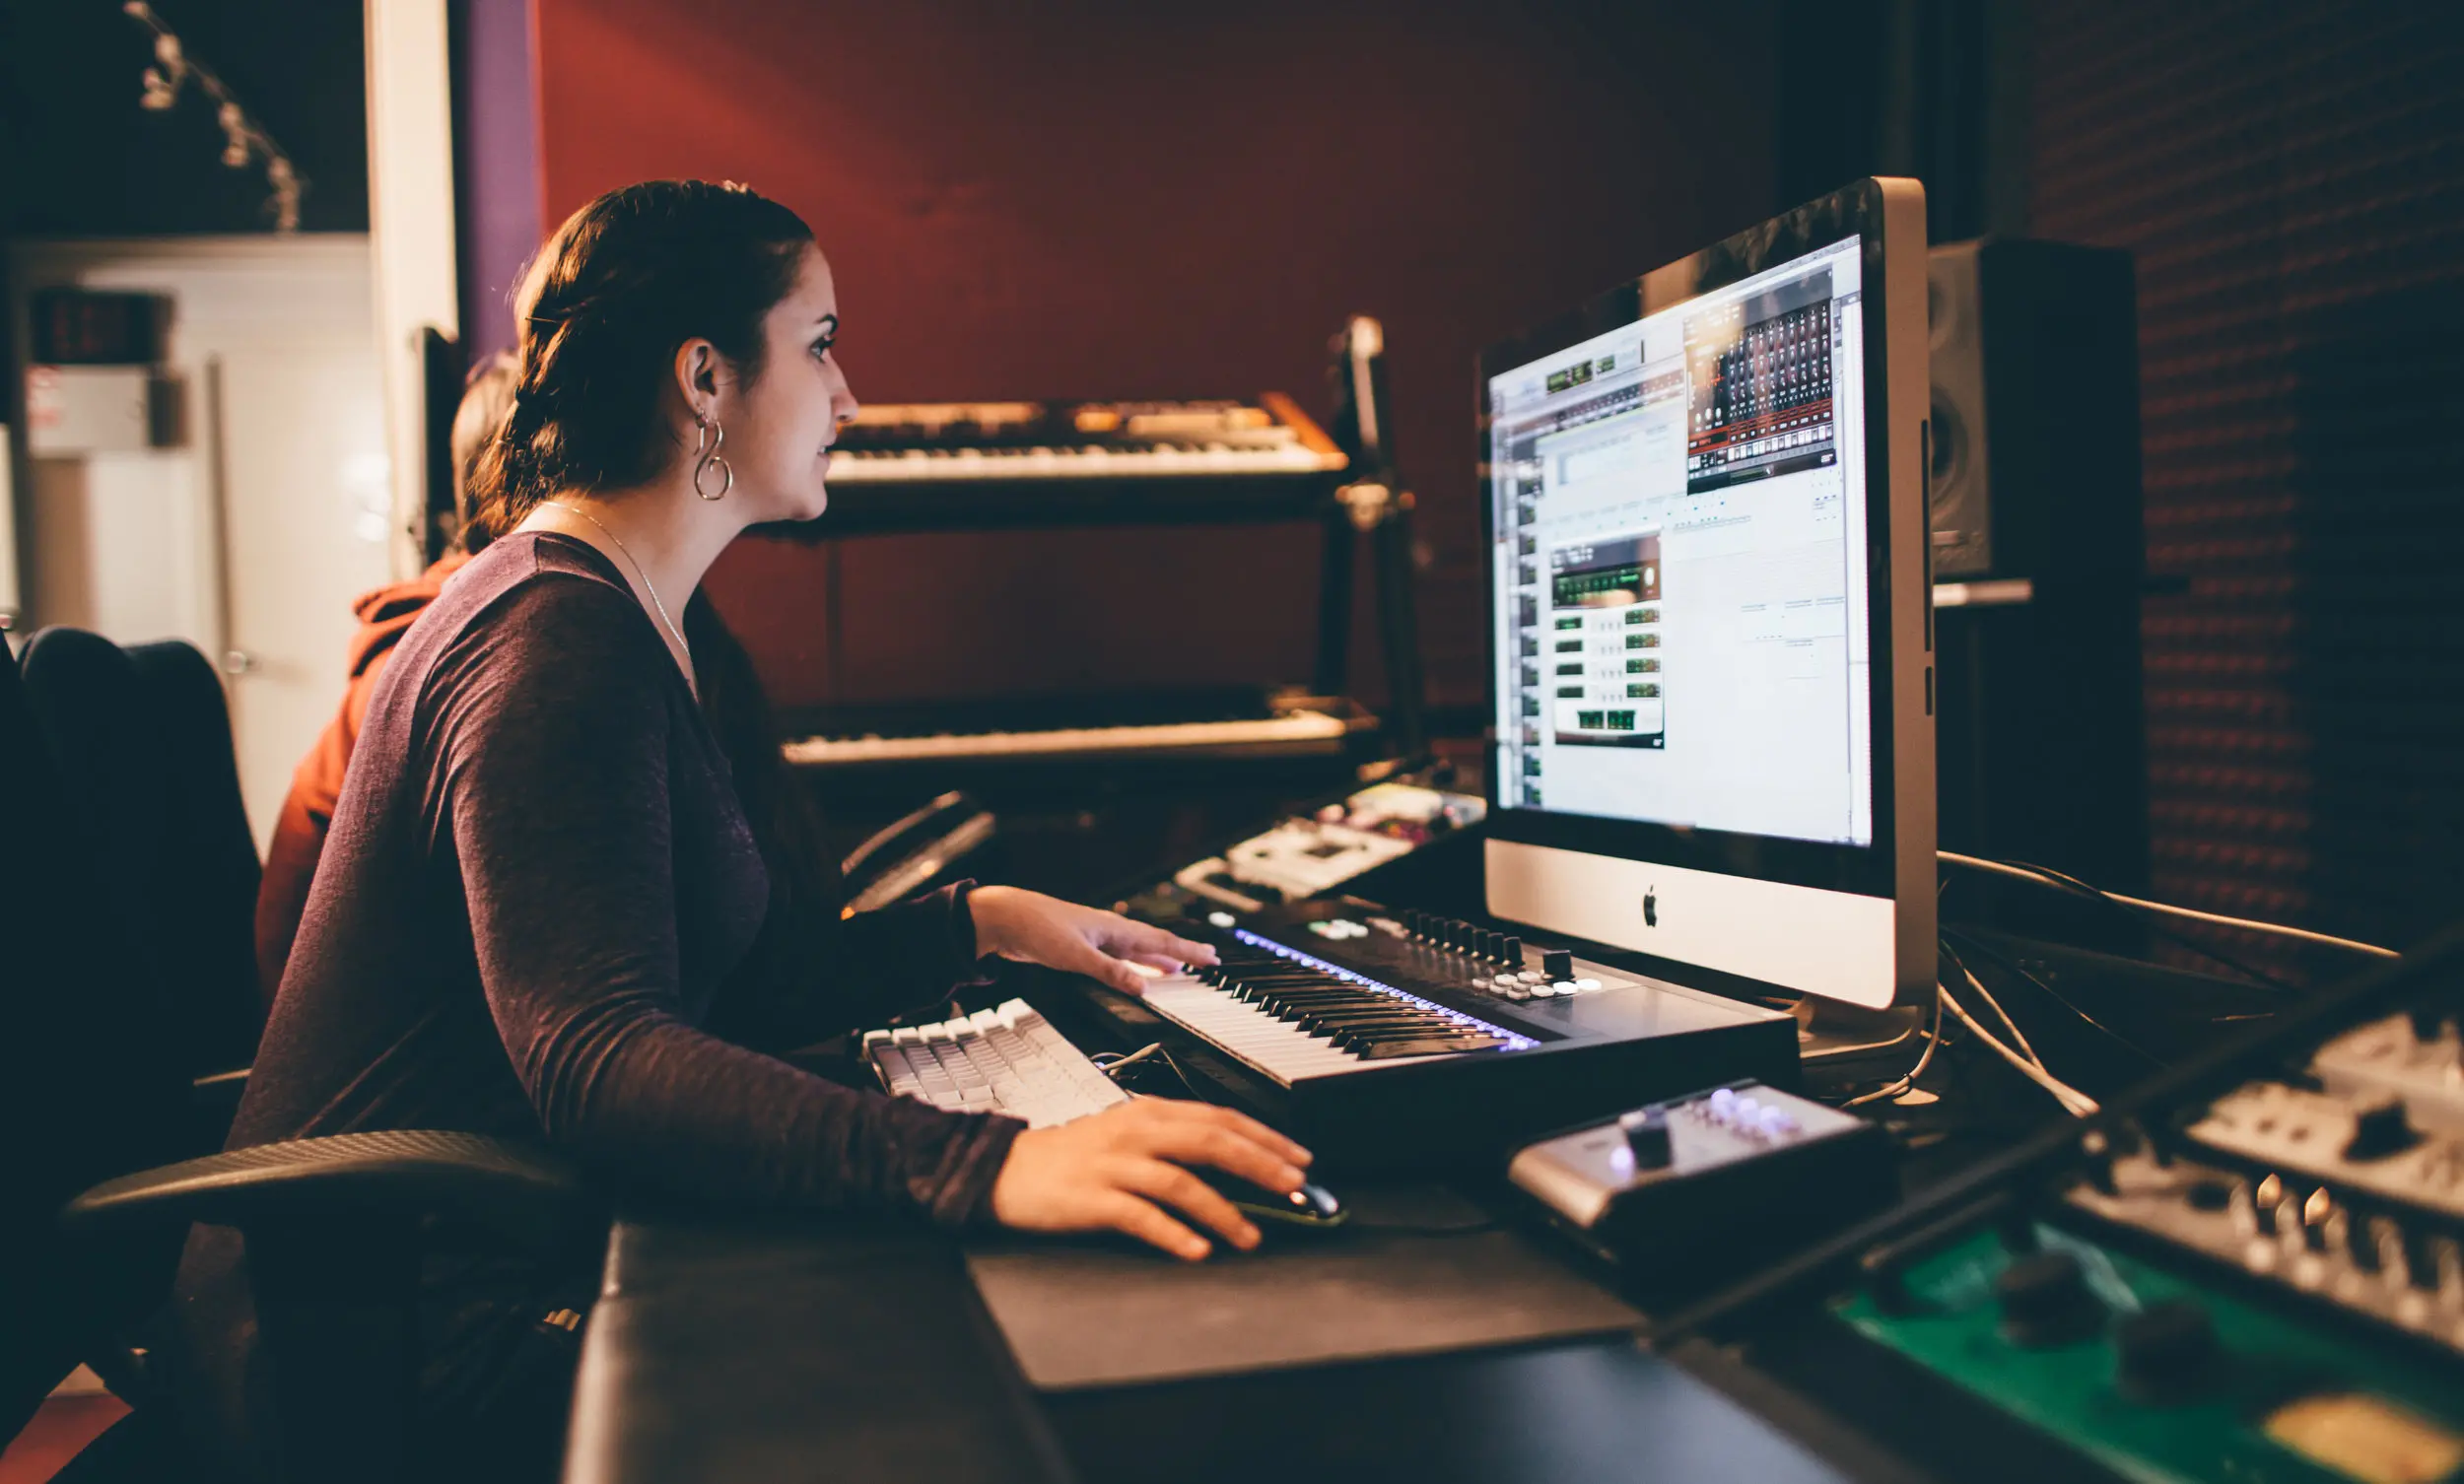 An experienced music producer engrossed in beatmaking on a computer in a recording studio.